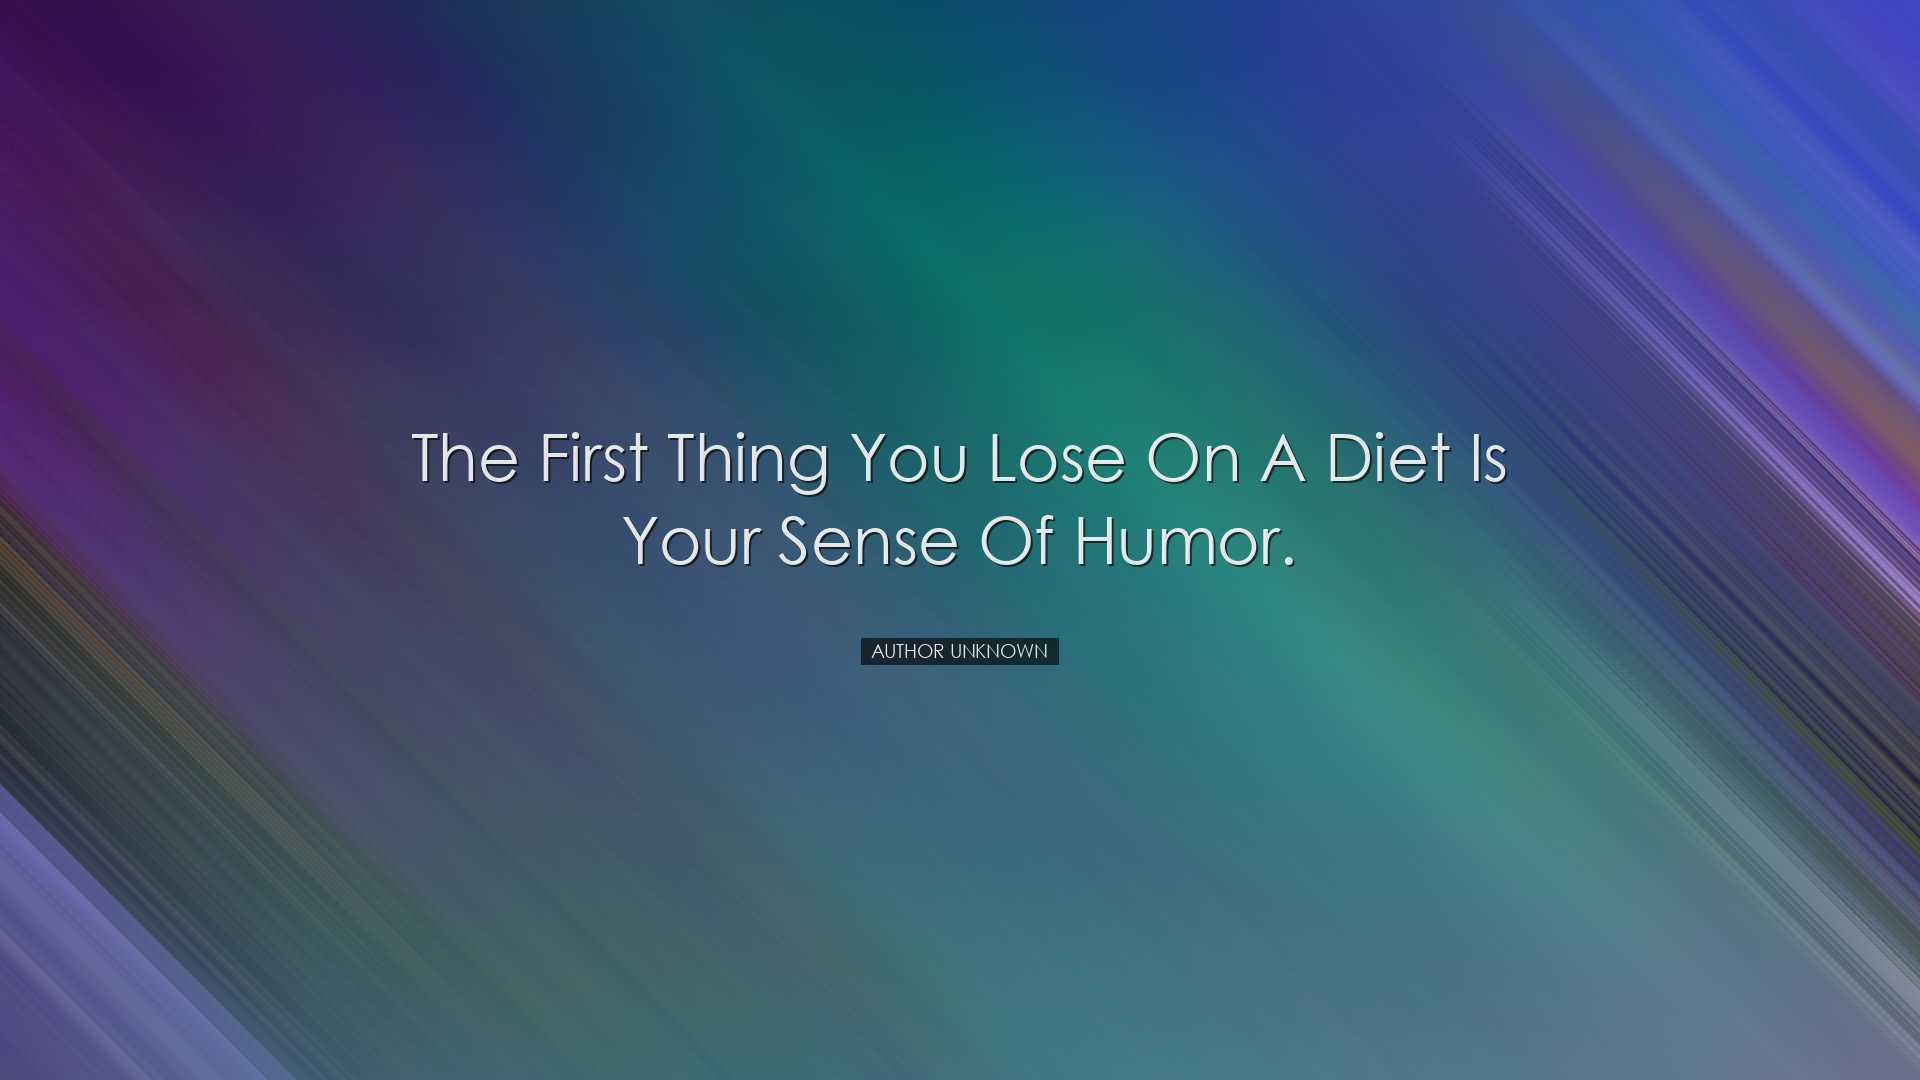 The first thing you lose on a diet is your sense of humor. - Autho